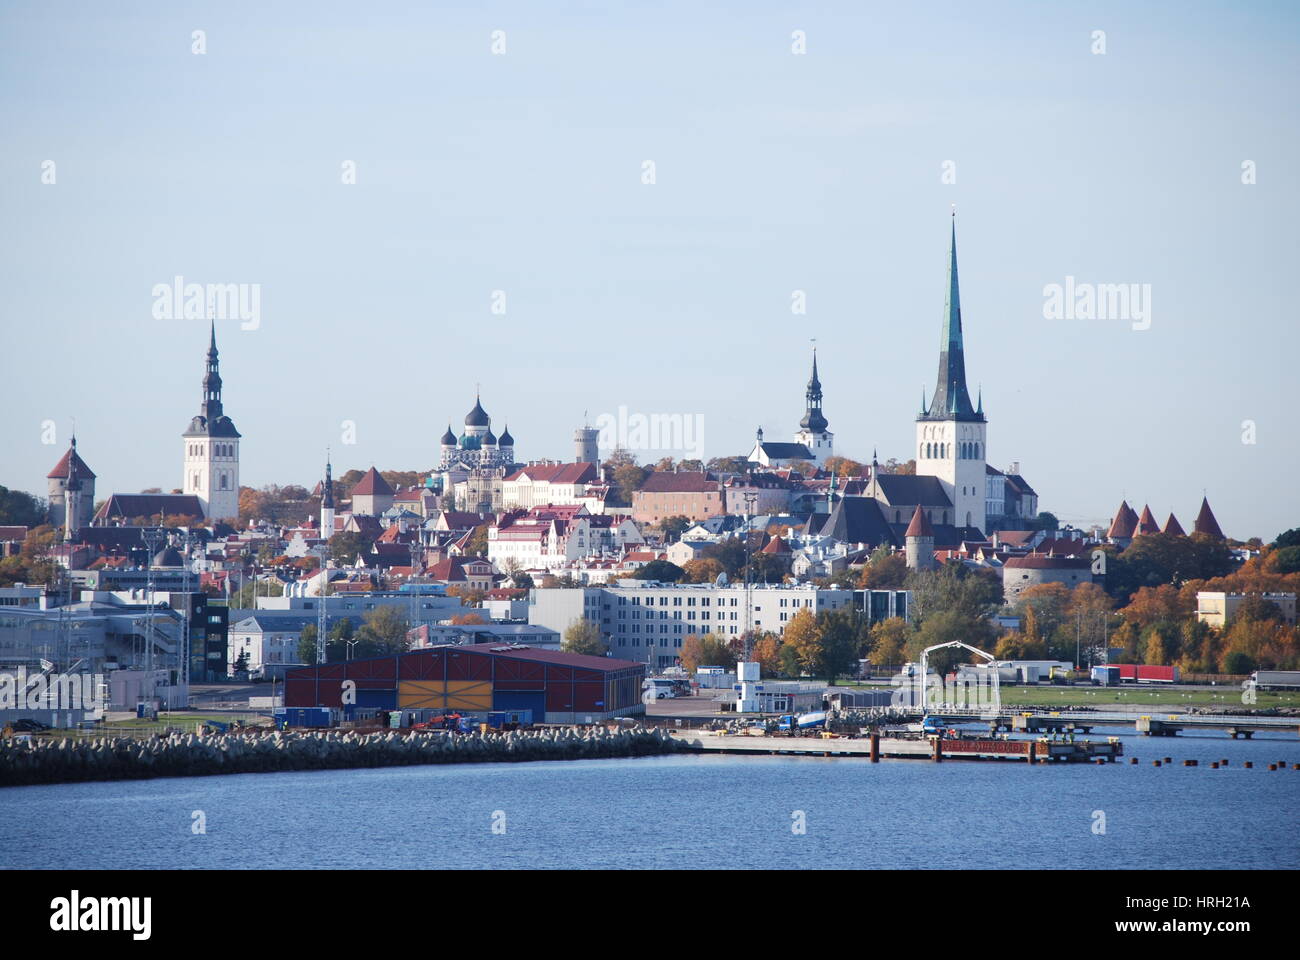 View to the Old Town Tallinn, Estonia from the port Stock Photo